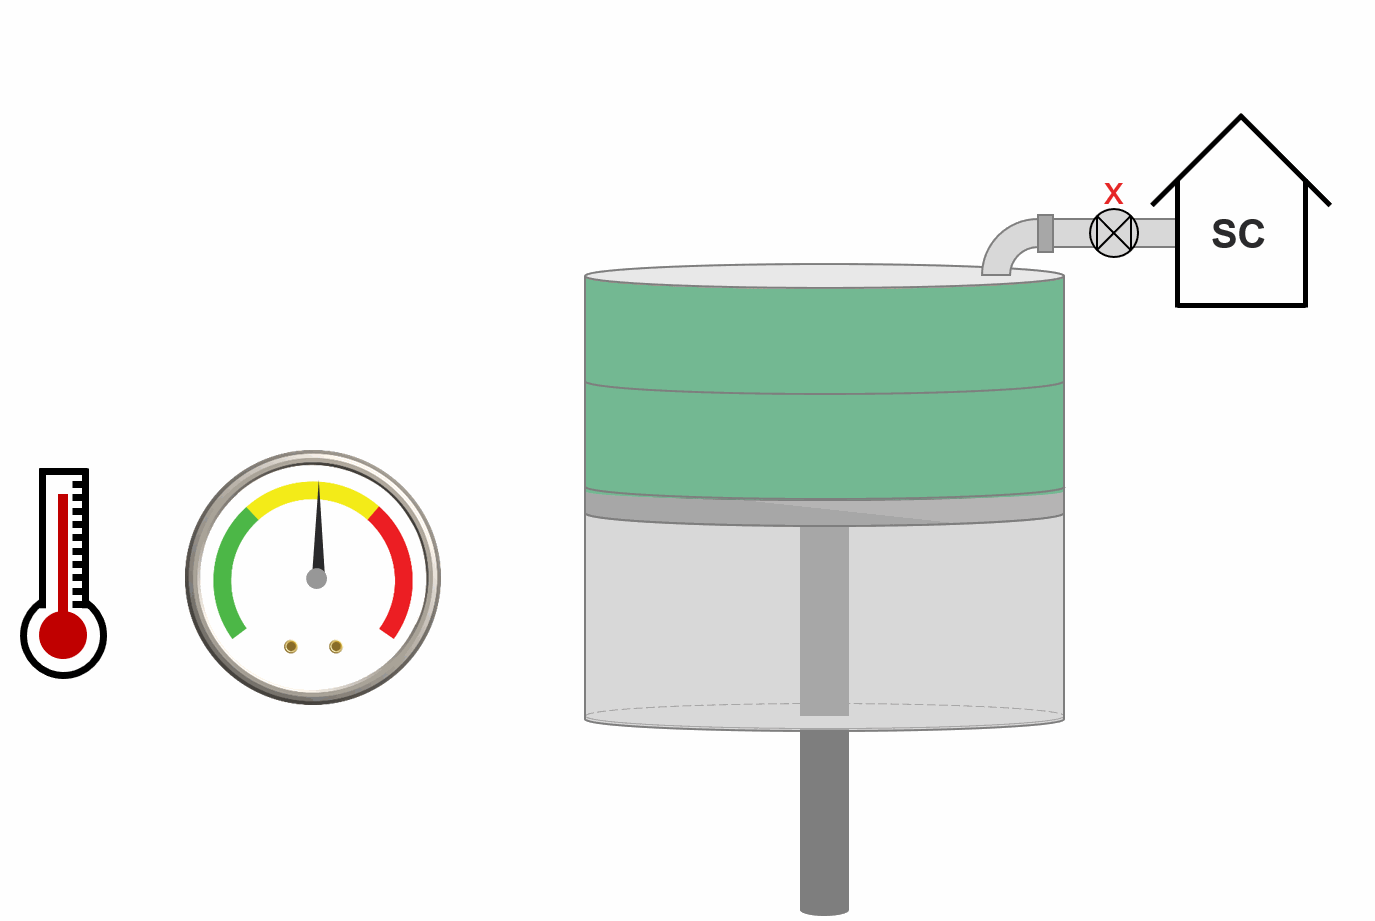 Animation of the swell test PVT experiment